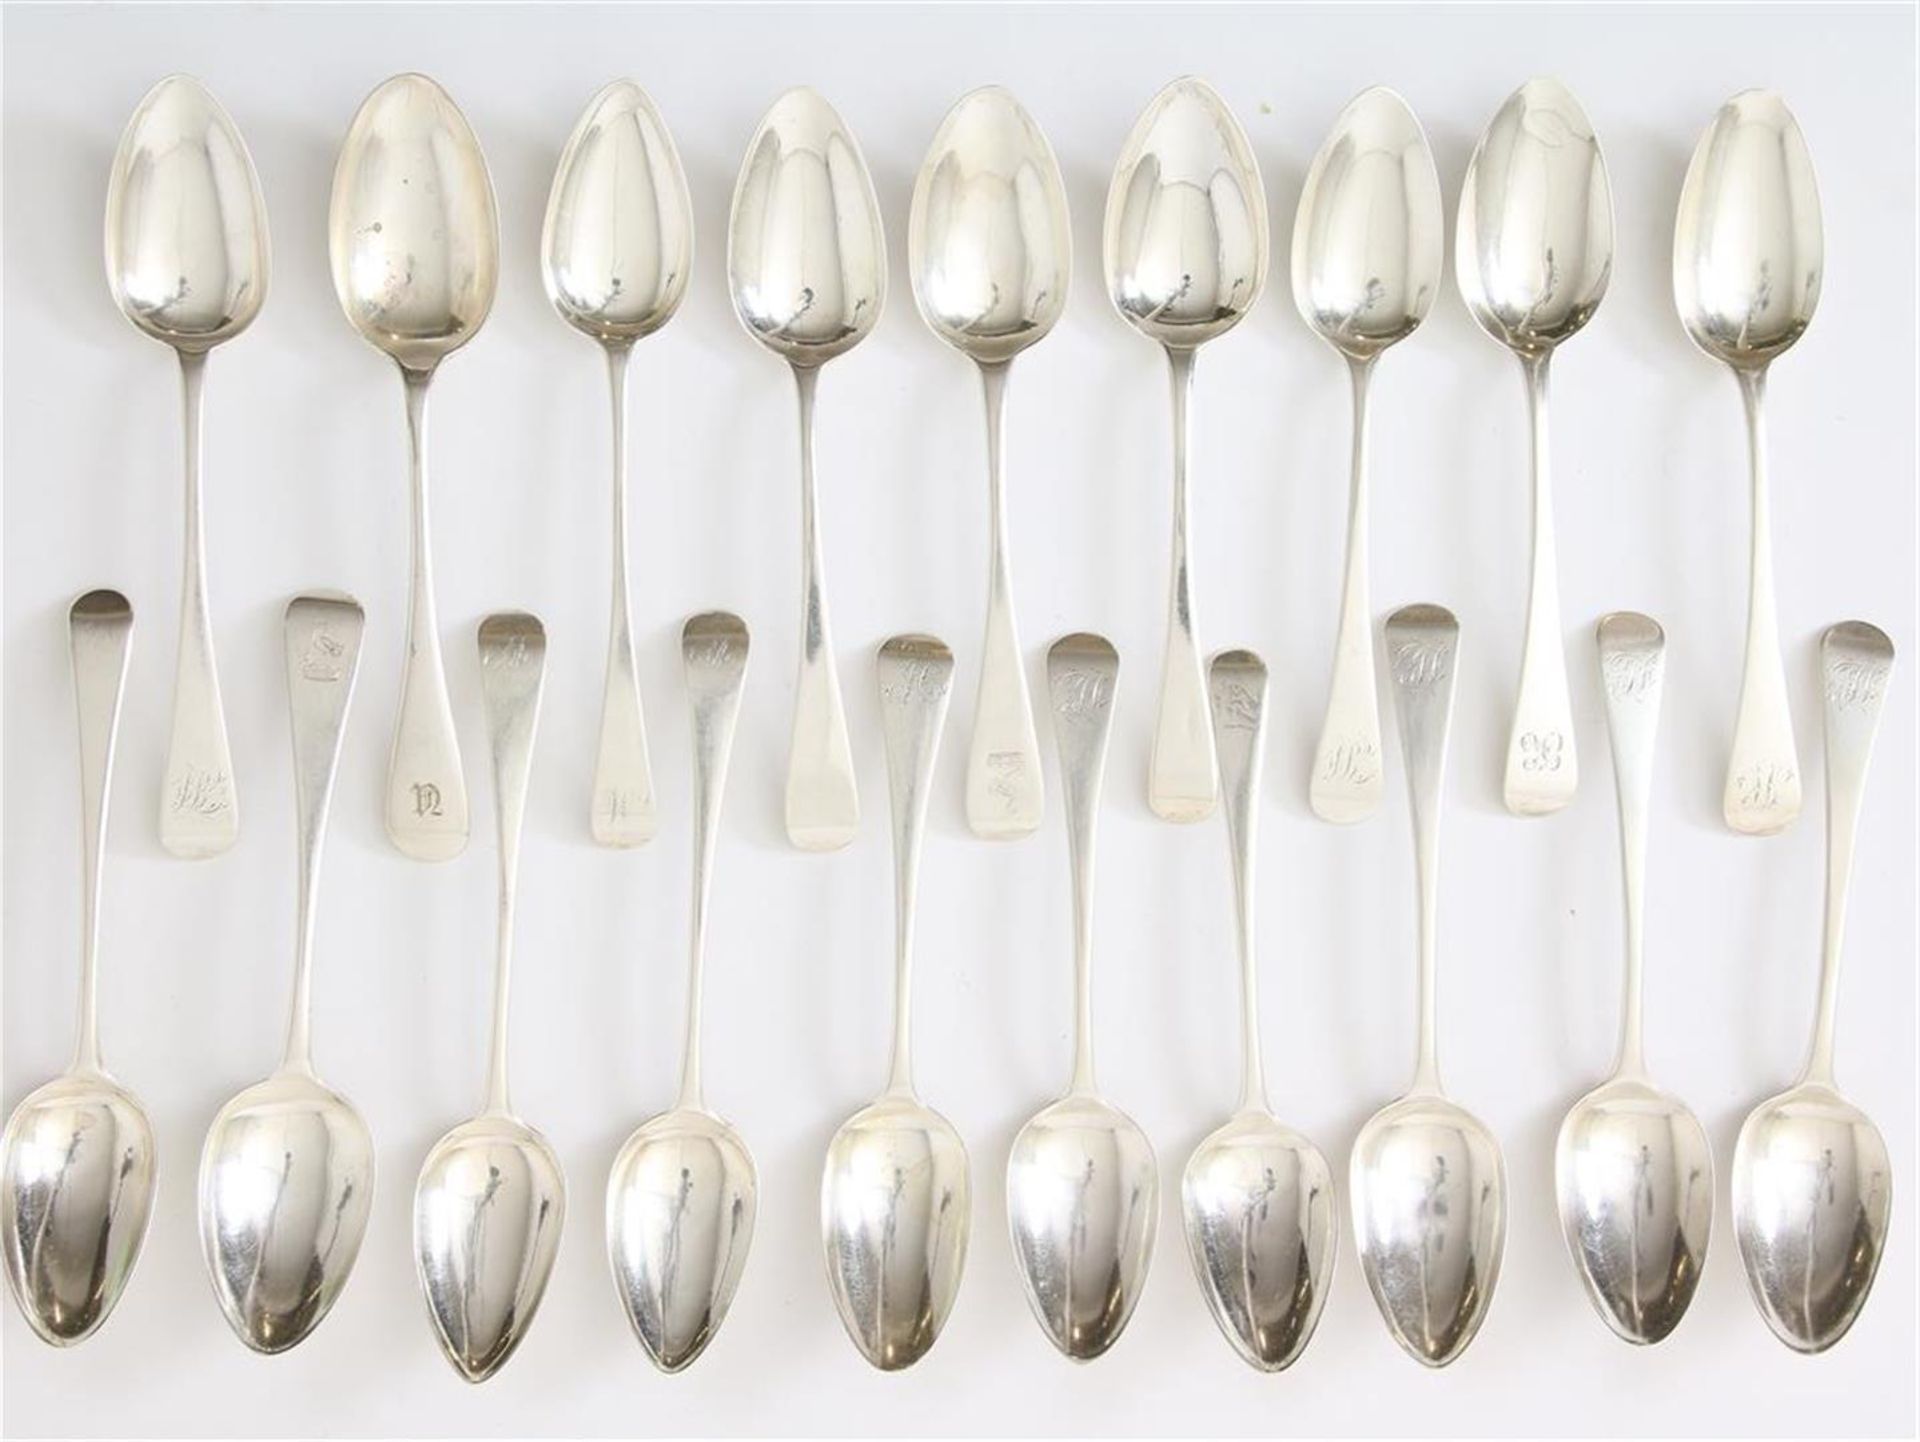 Lot with 19 small silver spoons, England, 19th century, gross weight 620 grams, partly with initials